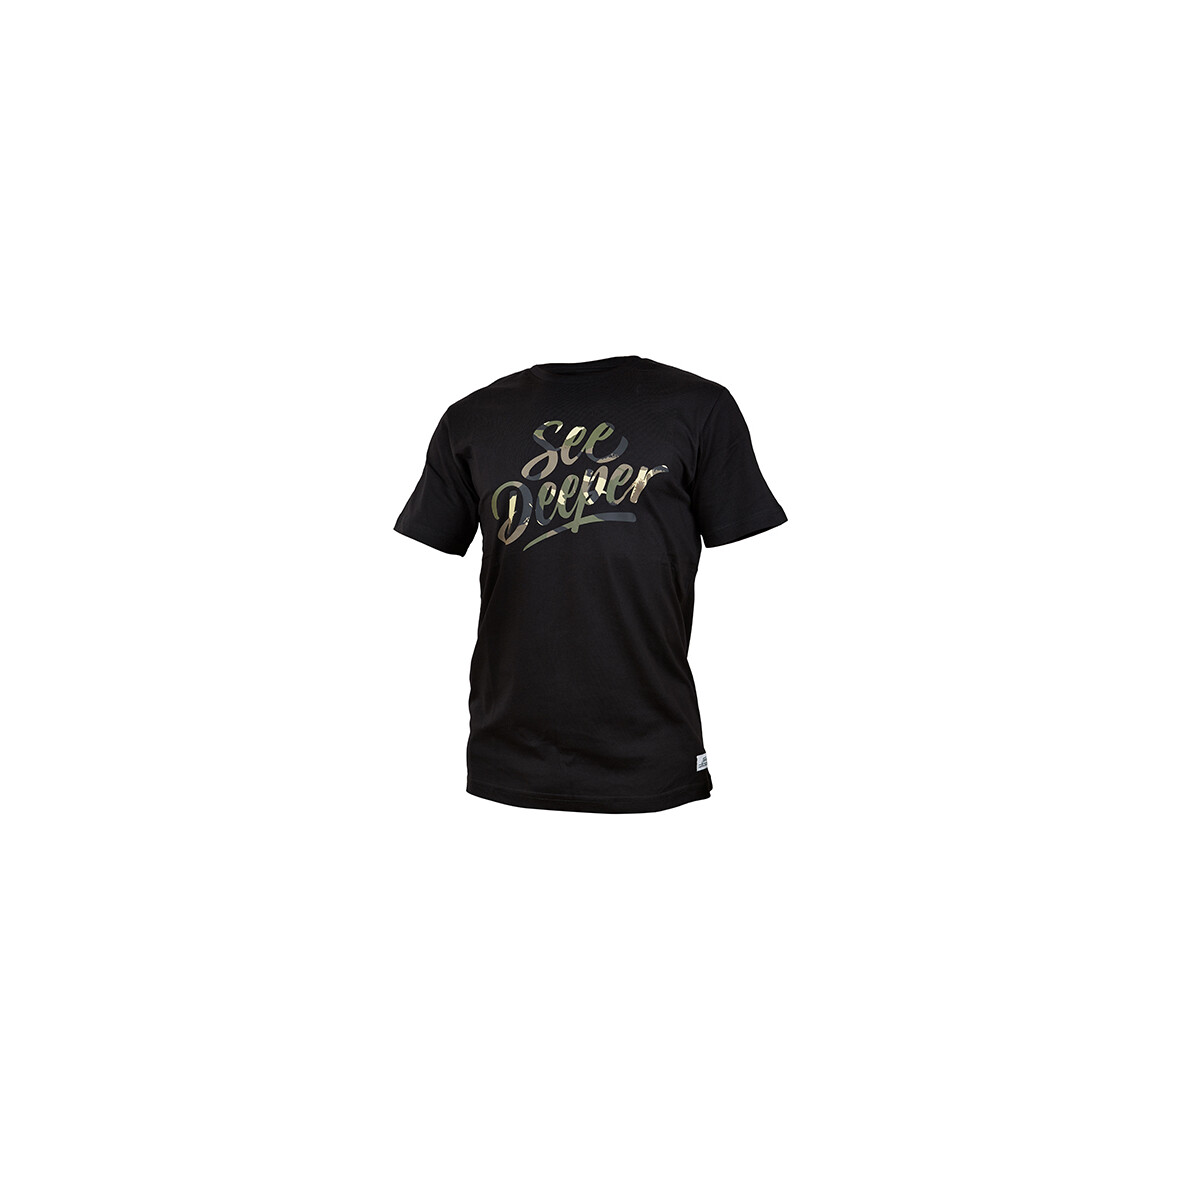 Fortis T-Shirt See Deeper Black